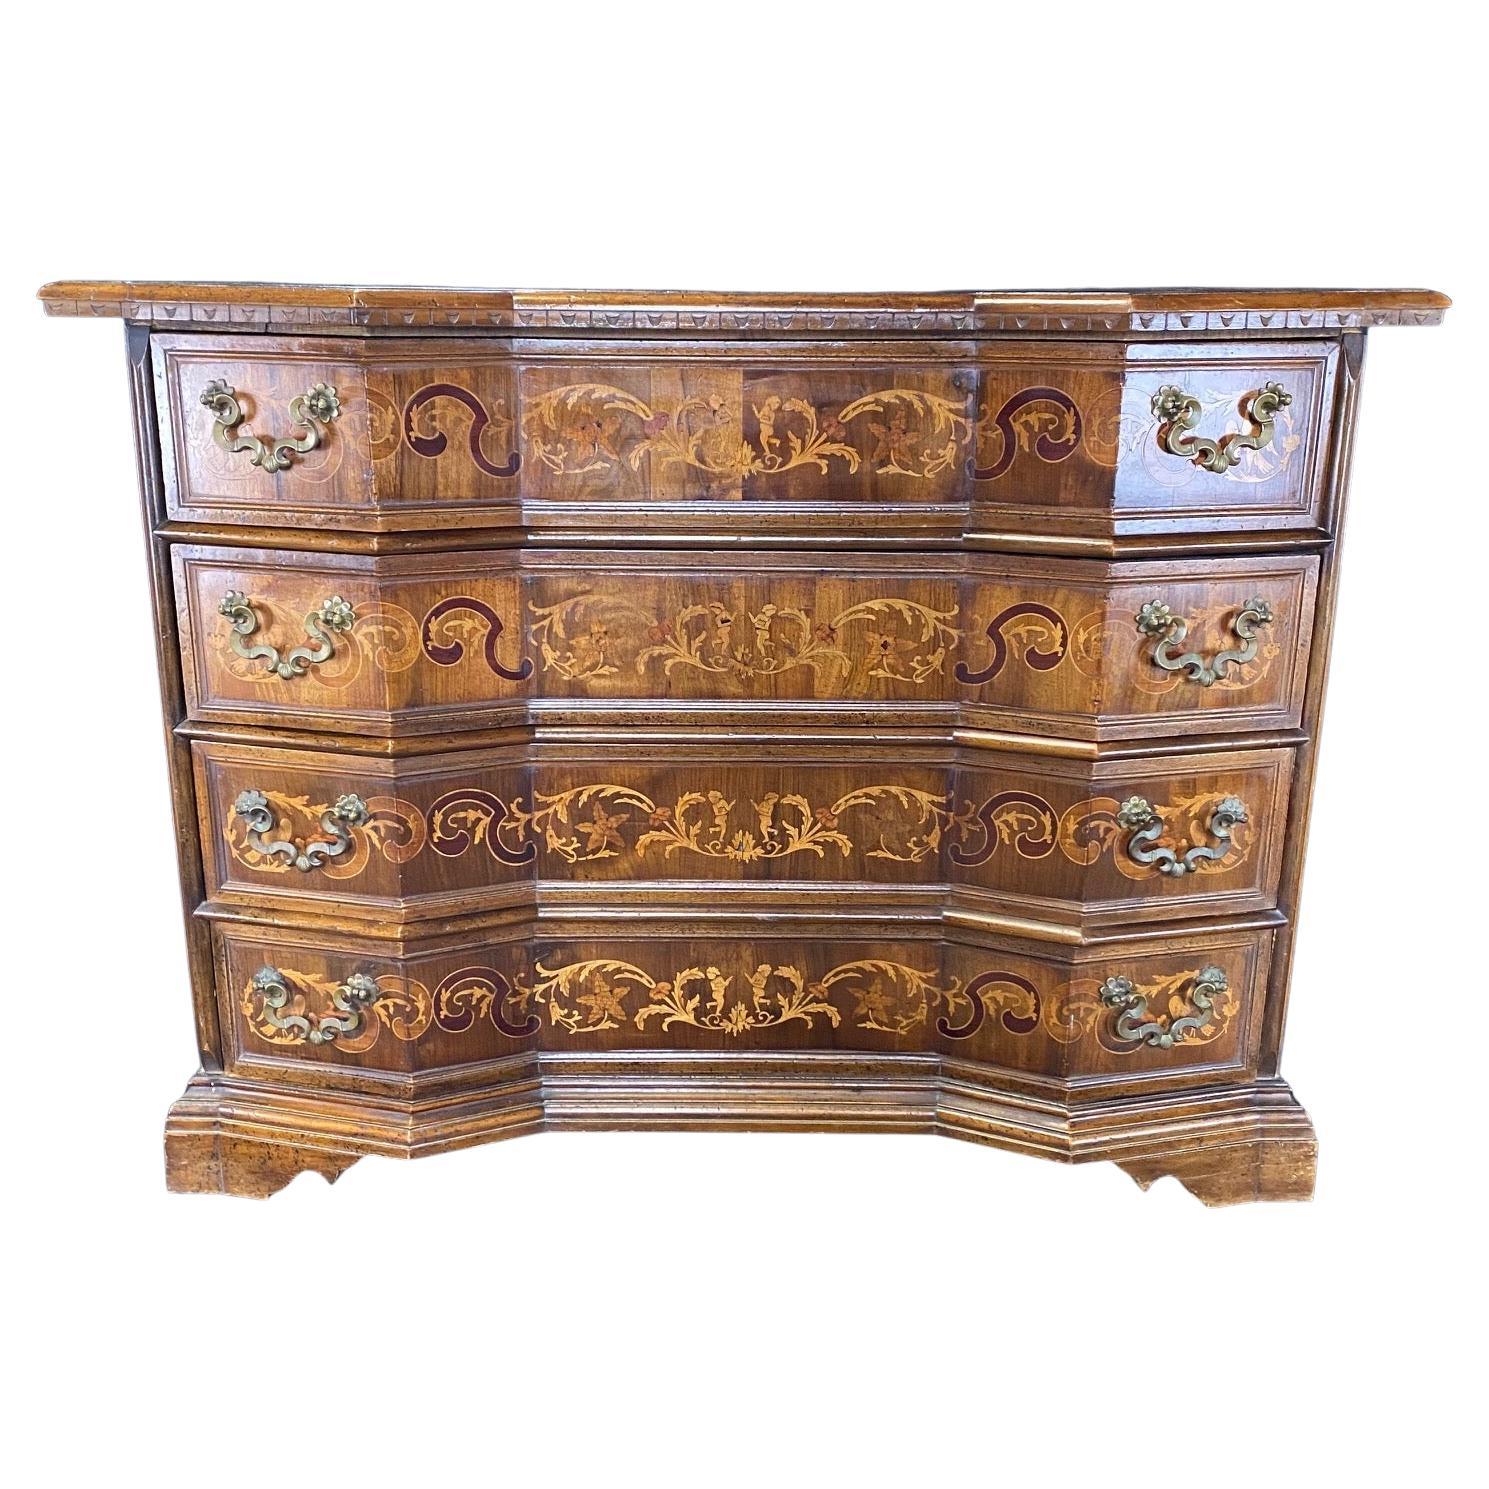 Magnificent Inlaid Mixed Wood Italian Serpentine Chest of Drawers For Sale